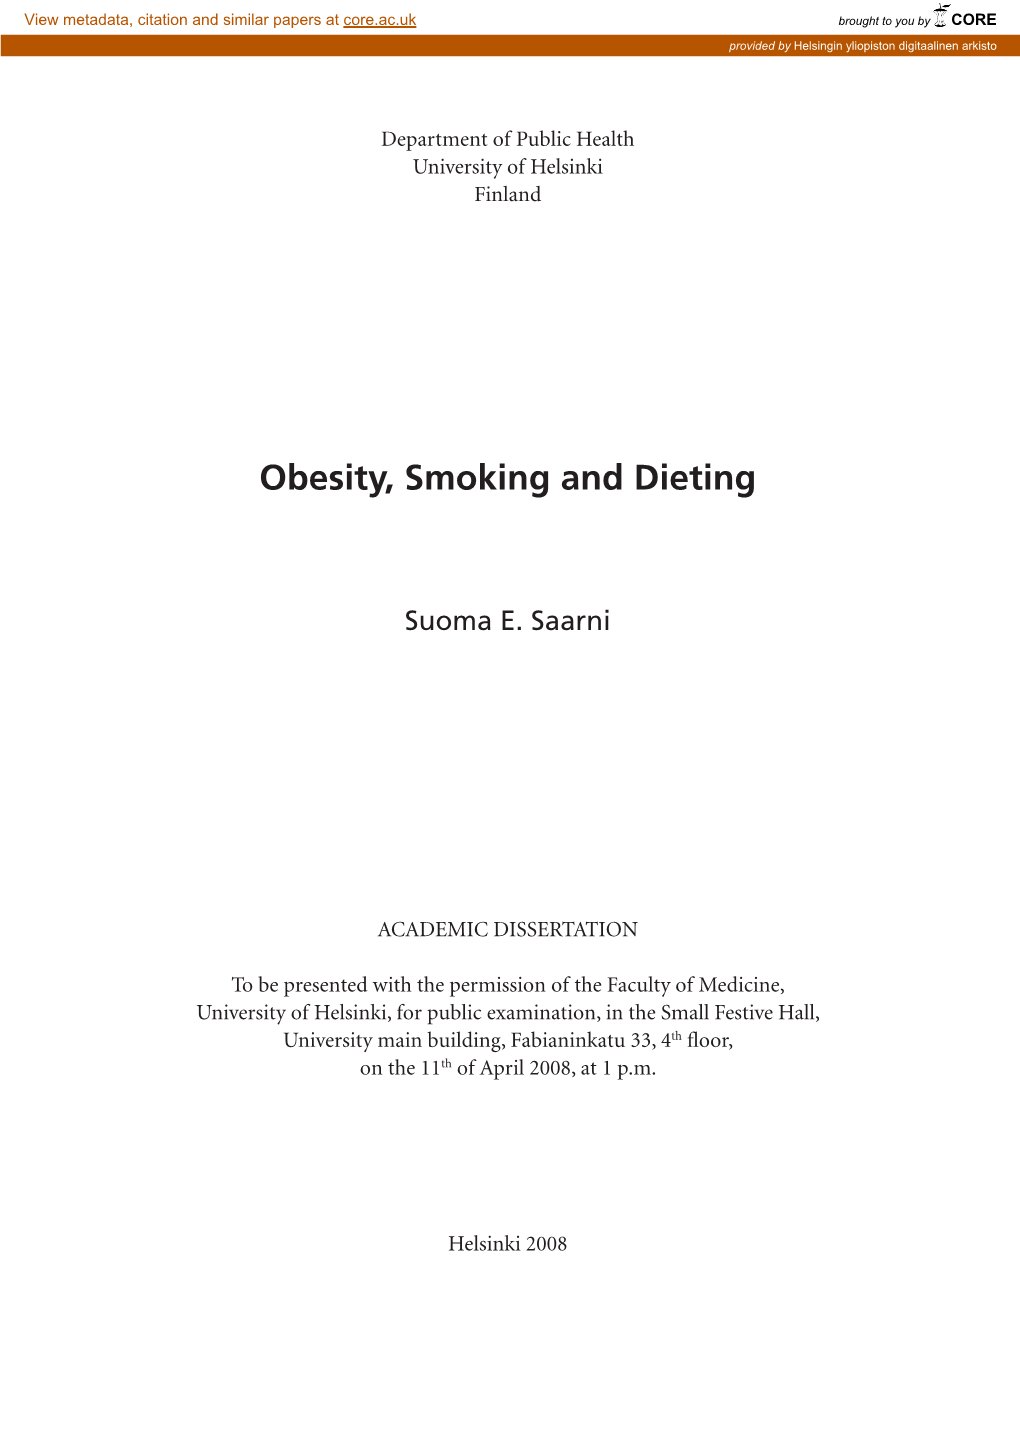 Obesity, Smoking and Dieting